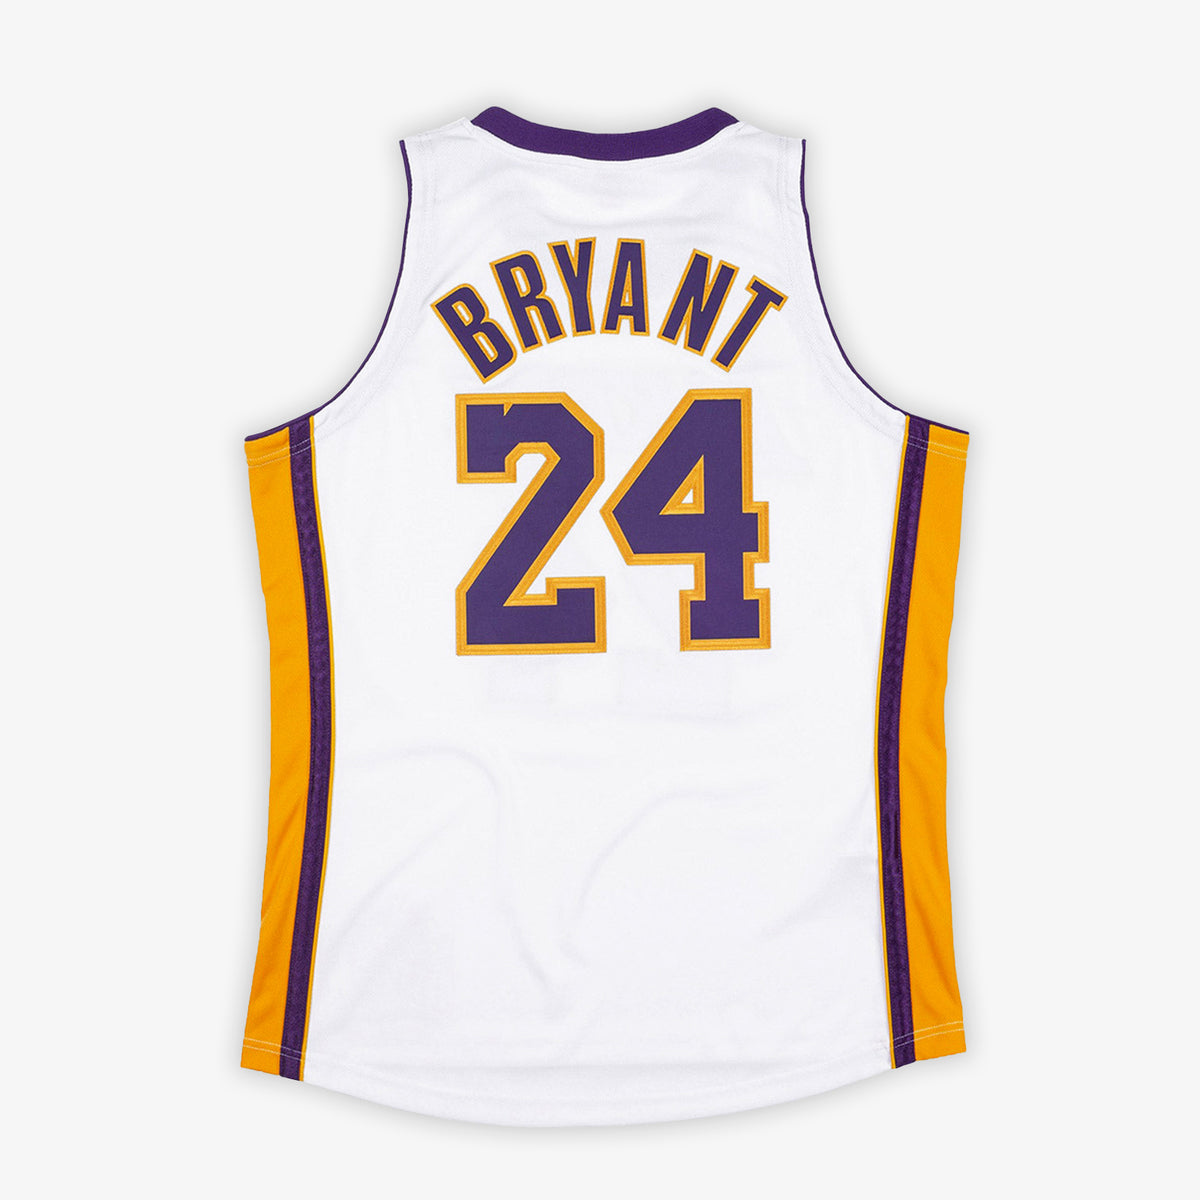 Kobe Bryant Los Angeles Lakers Alternate 09-10 NBA Finals Authentic Hardwood Classic Jersey - White